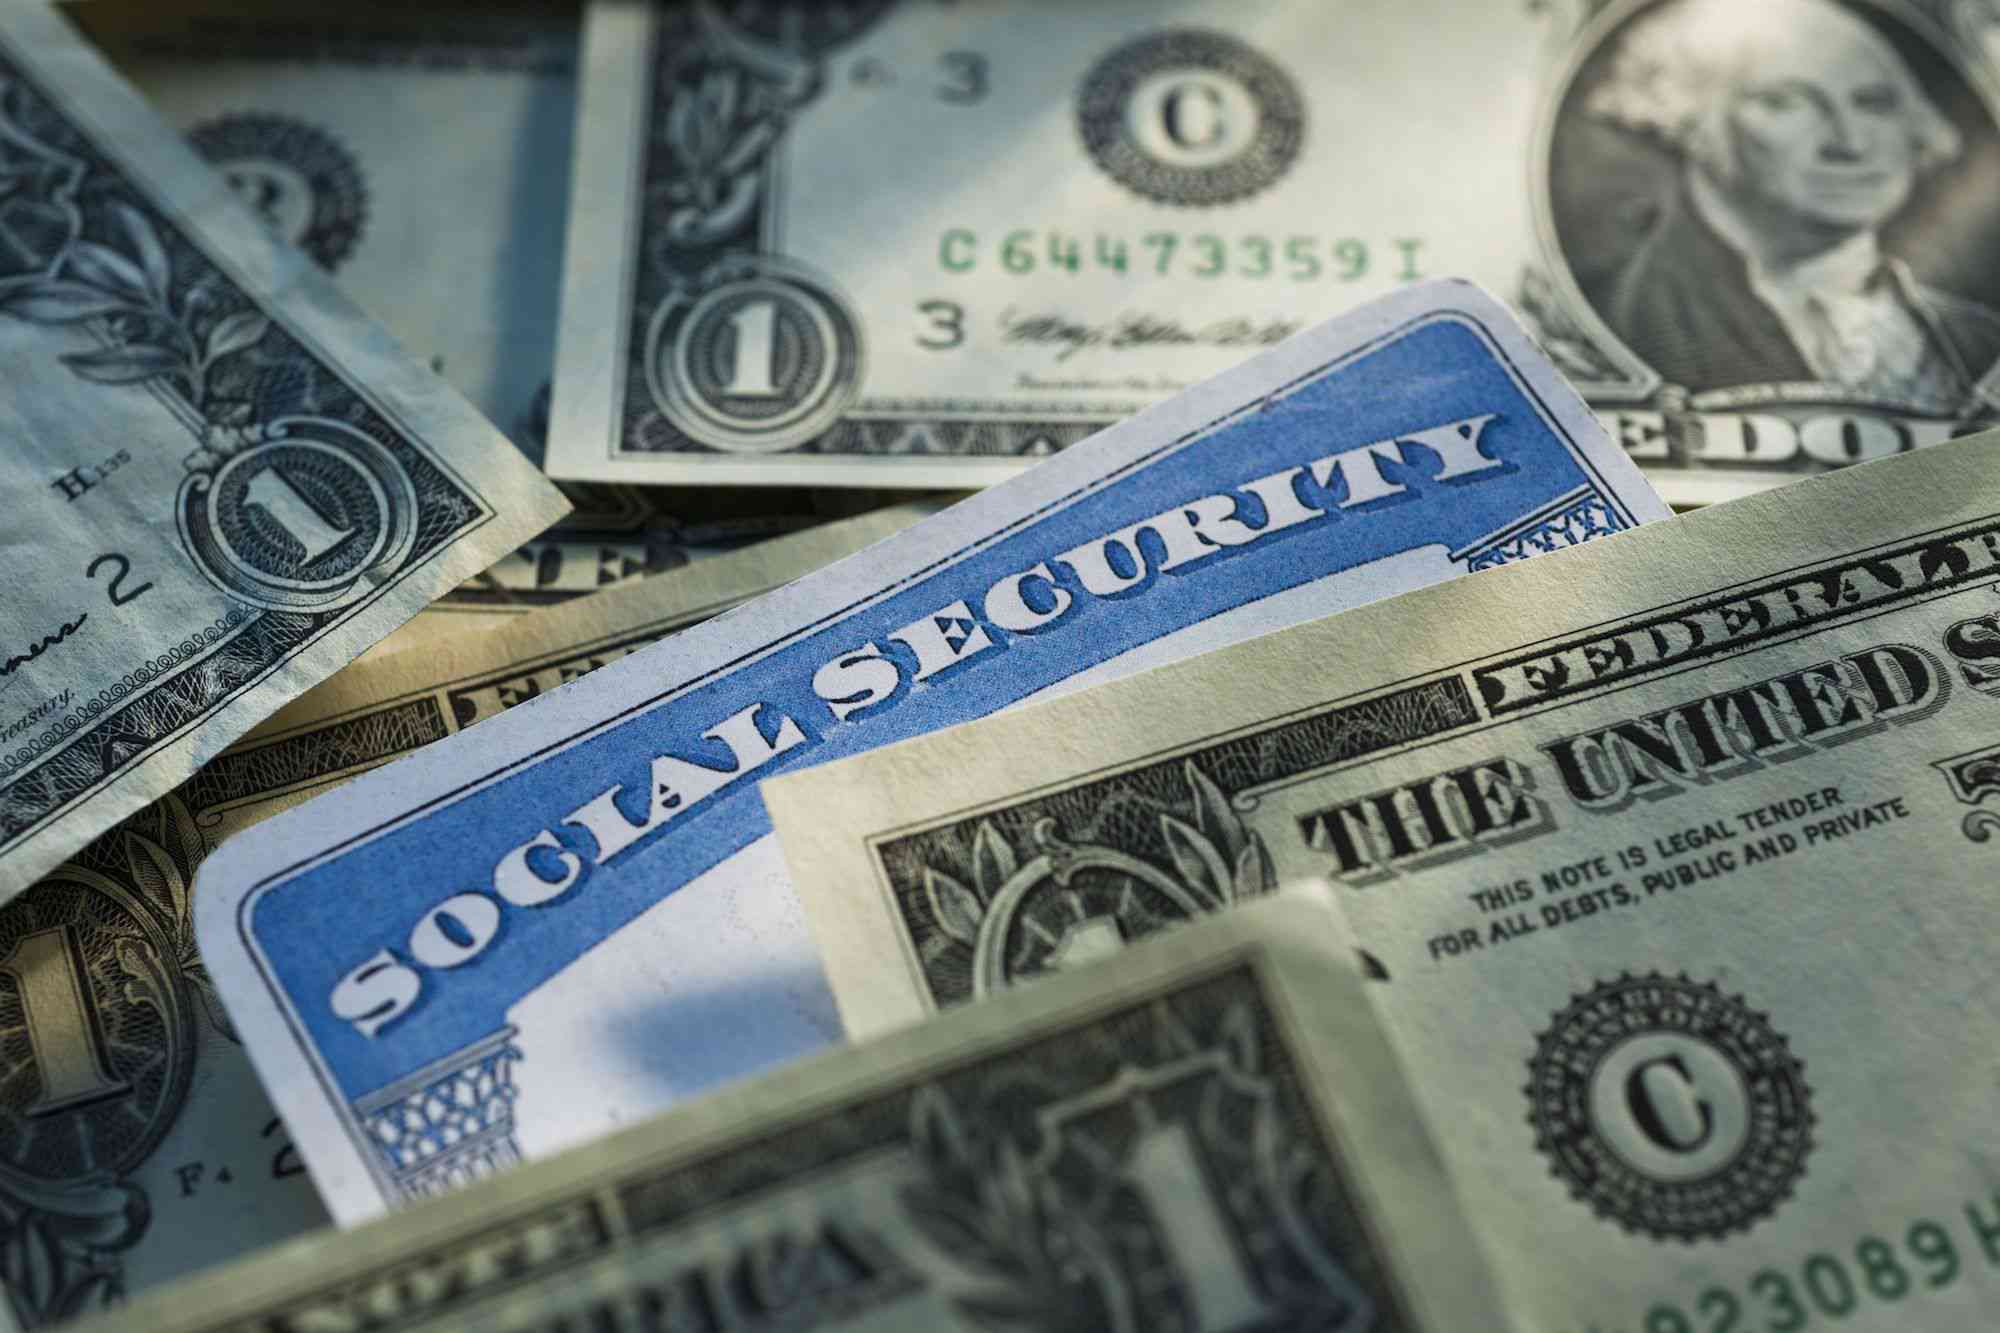 Social Security card surrounded by cash, representing tax on Social Security payments.